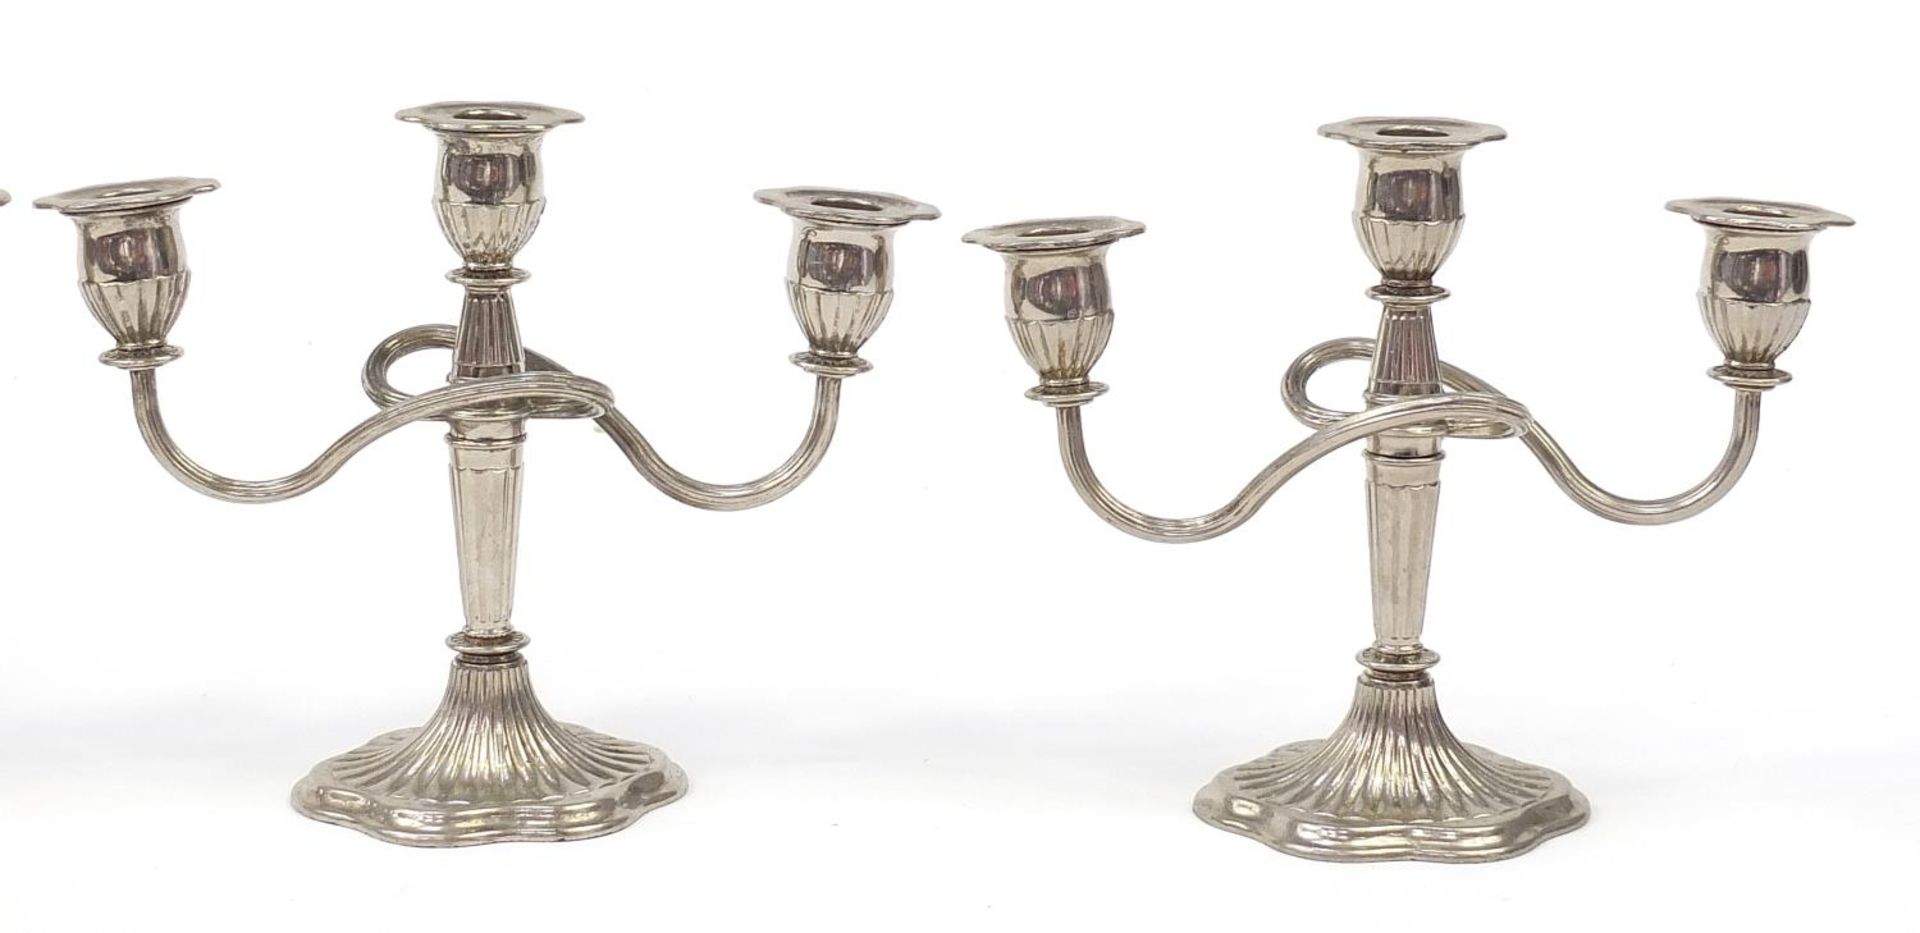 Two pairs of three branch candelabras, 21cm high - Image 3 of 5